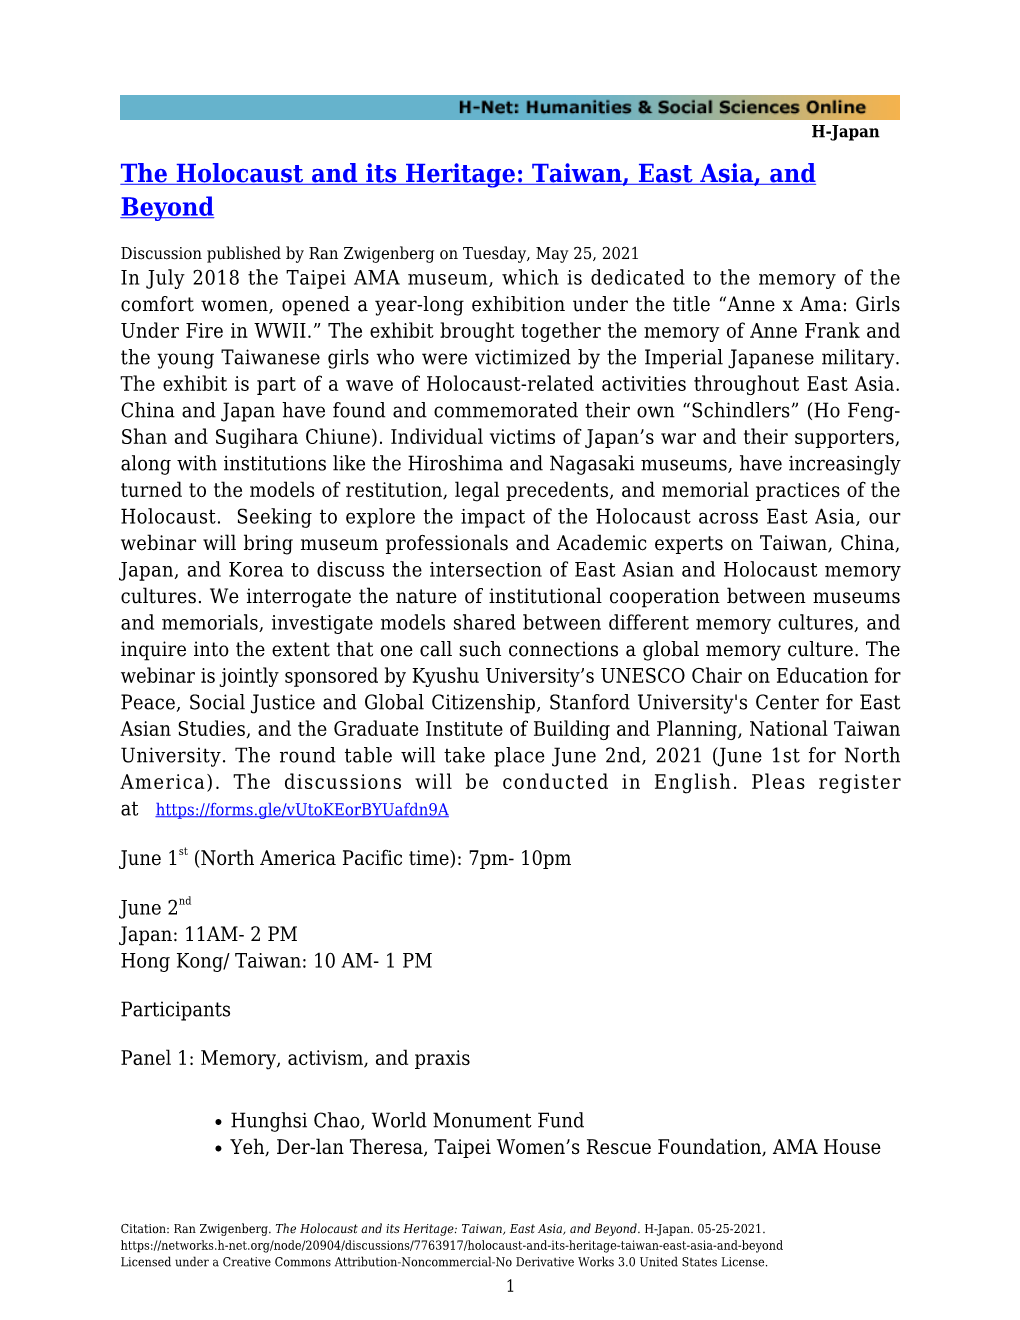 The Holocaust and Its Heritage: Taiwan, East Asia, and Beyond